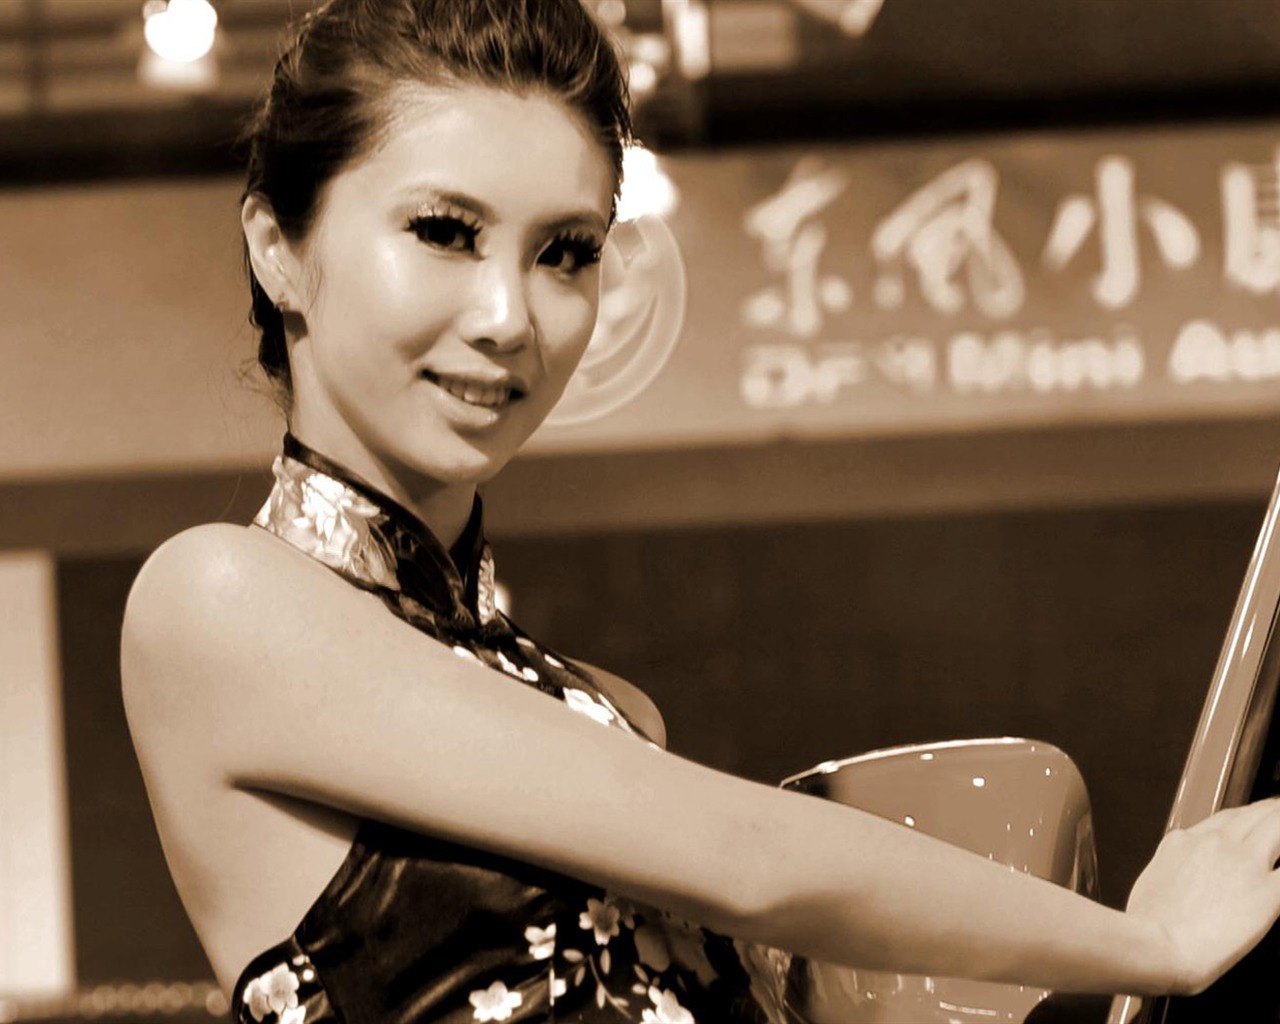 2010 Beijing Auto Show beauty (Kuei-east of the first works) #17 - 1280x1024